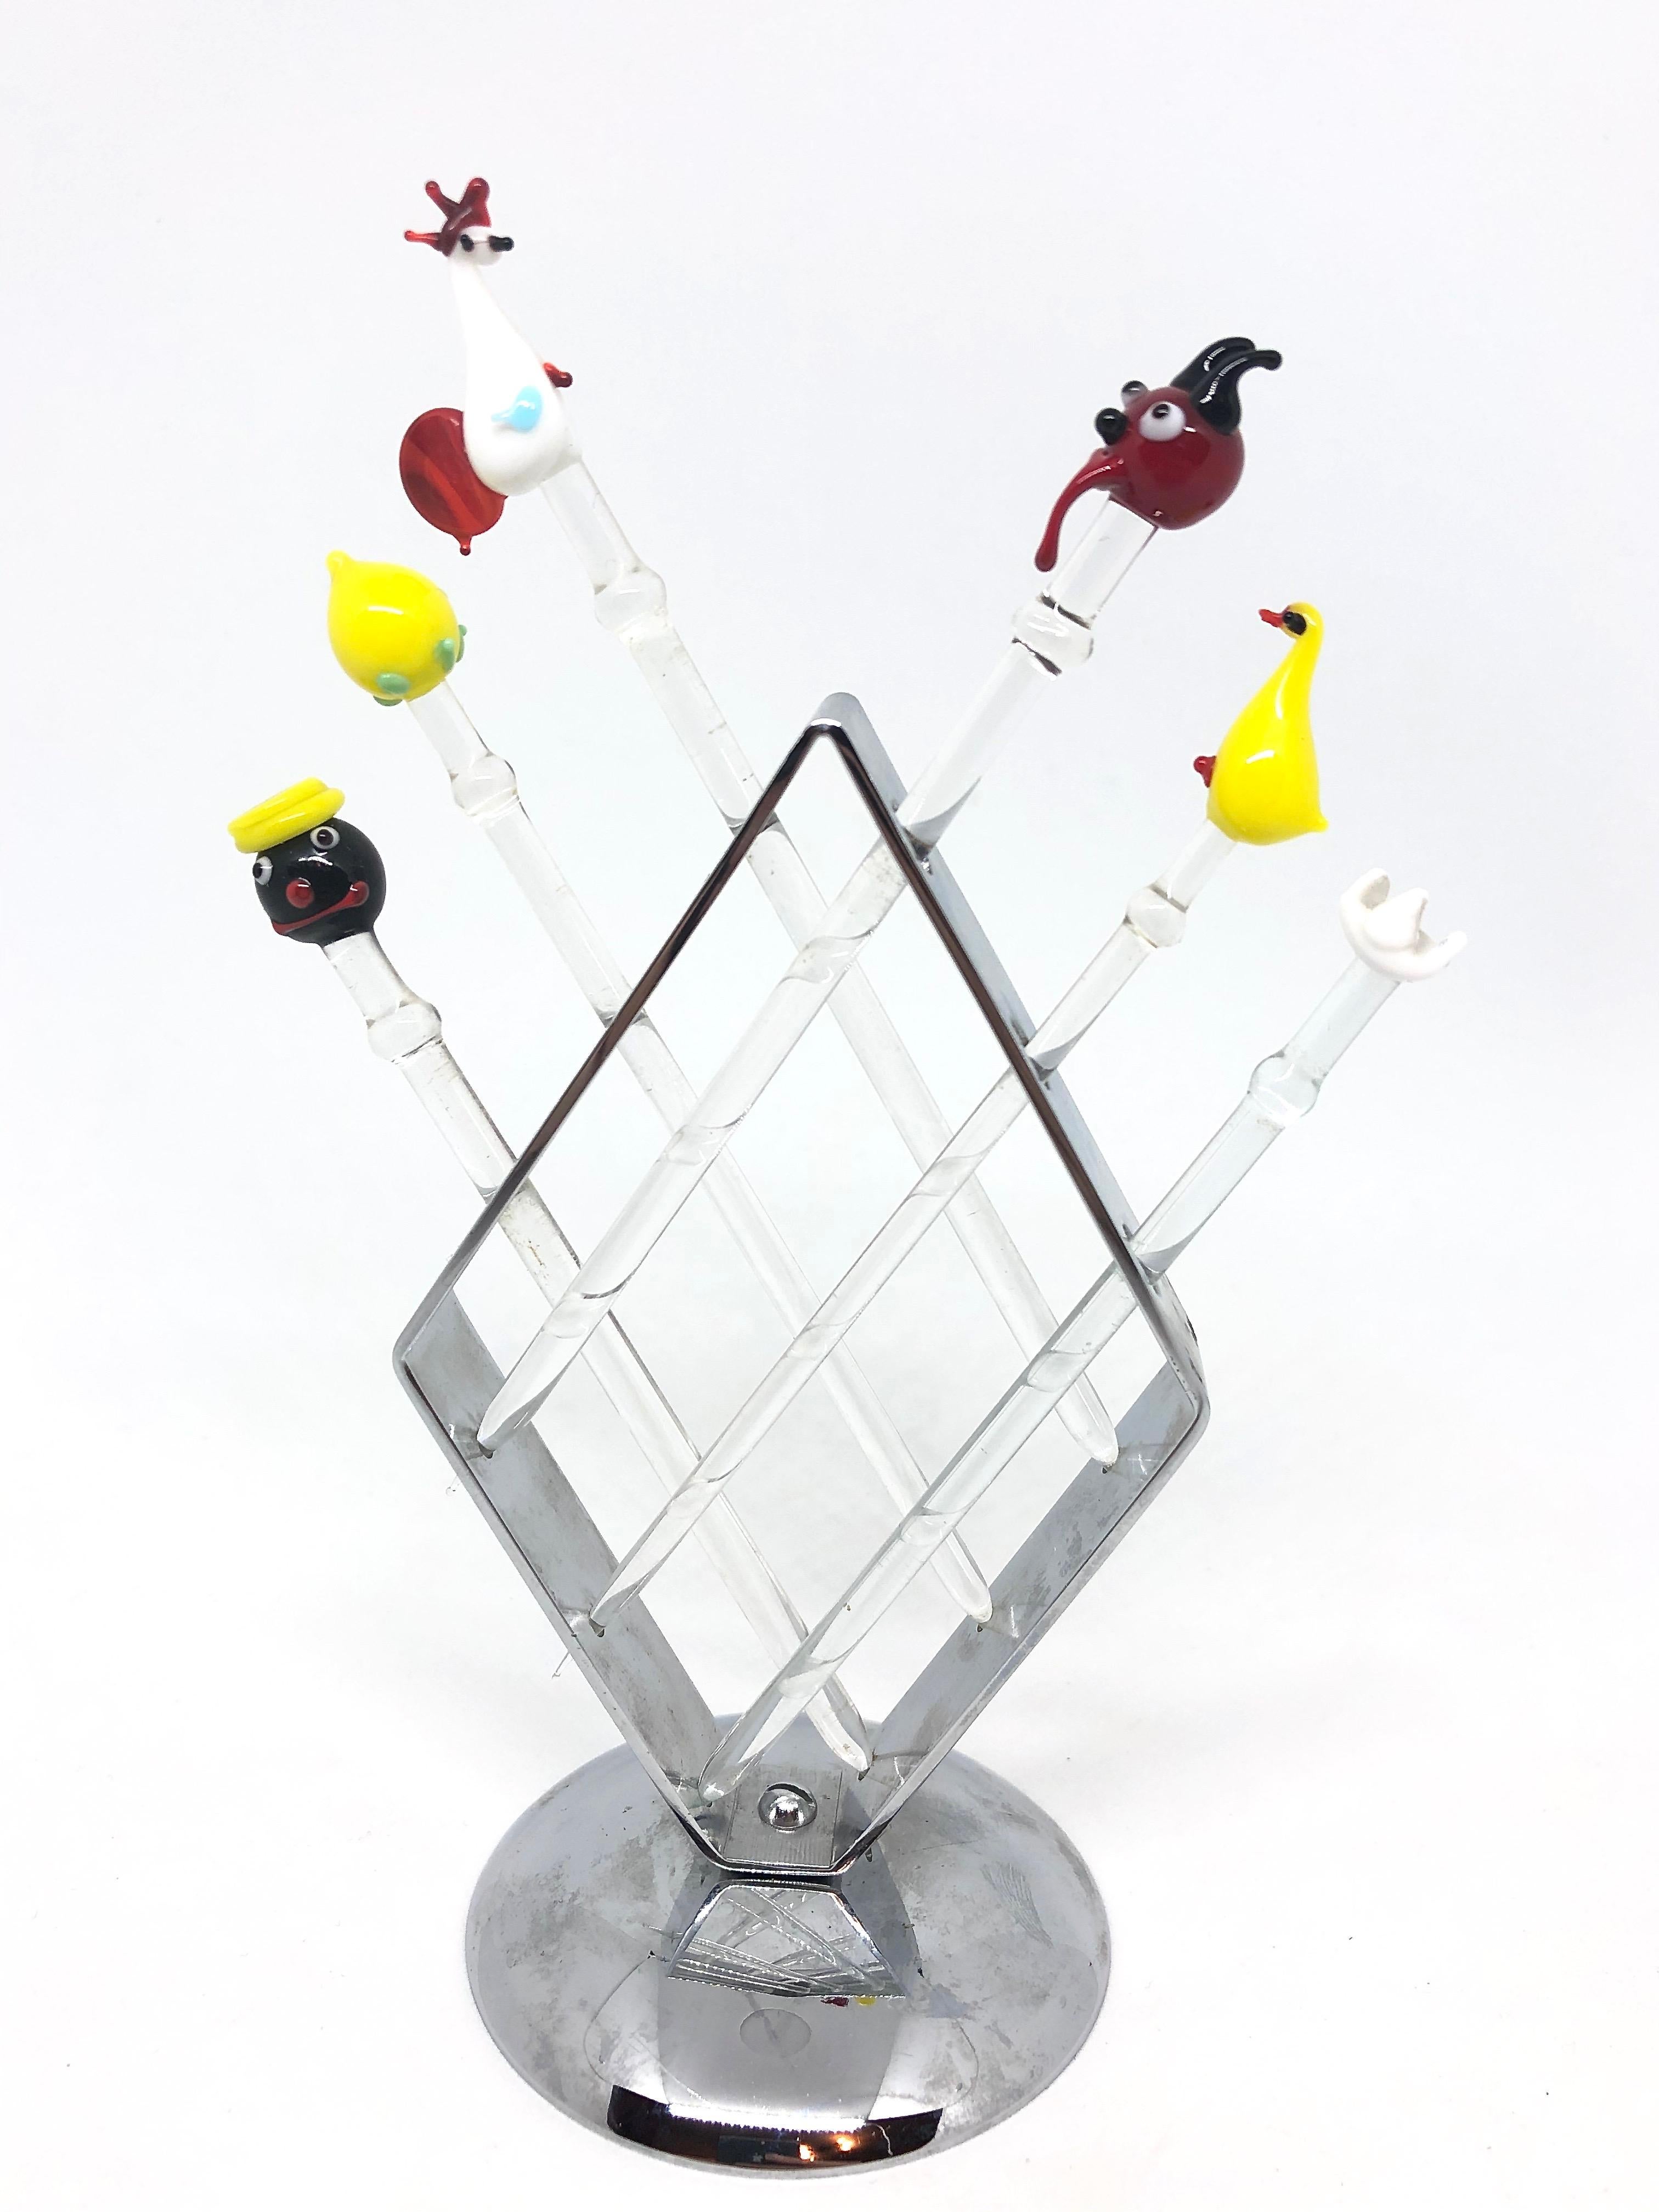 Classic early 1960s Austrian cocktail picks made of glass, showing flowers, fruits and animals, also a rare Devil Head. Nice addition to your room, bar cart or just for your collection of design items. Stand made of chromed metal. Found at an estate